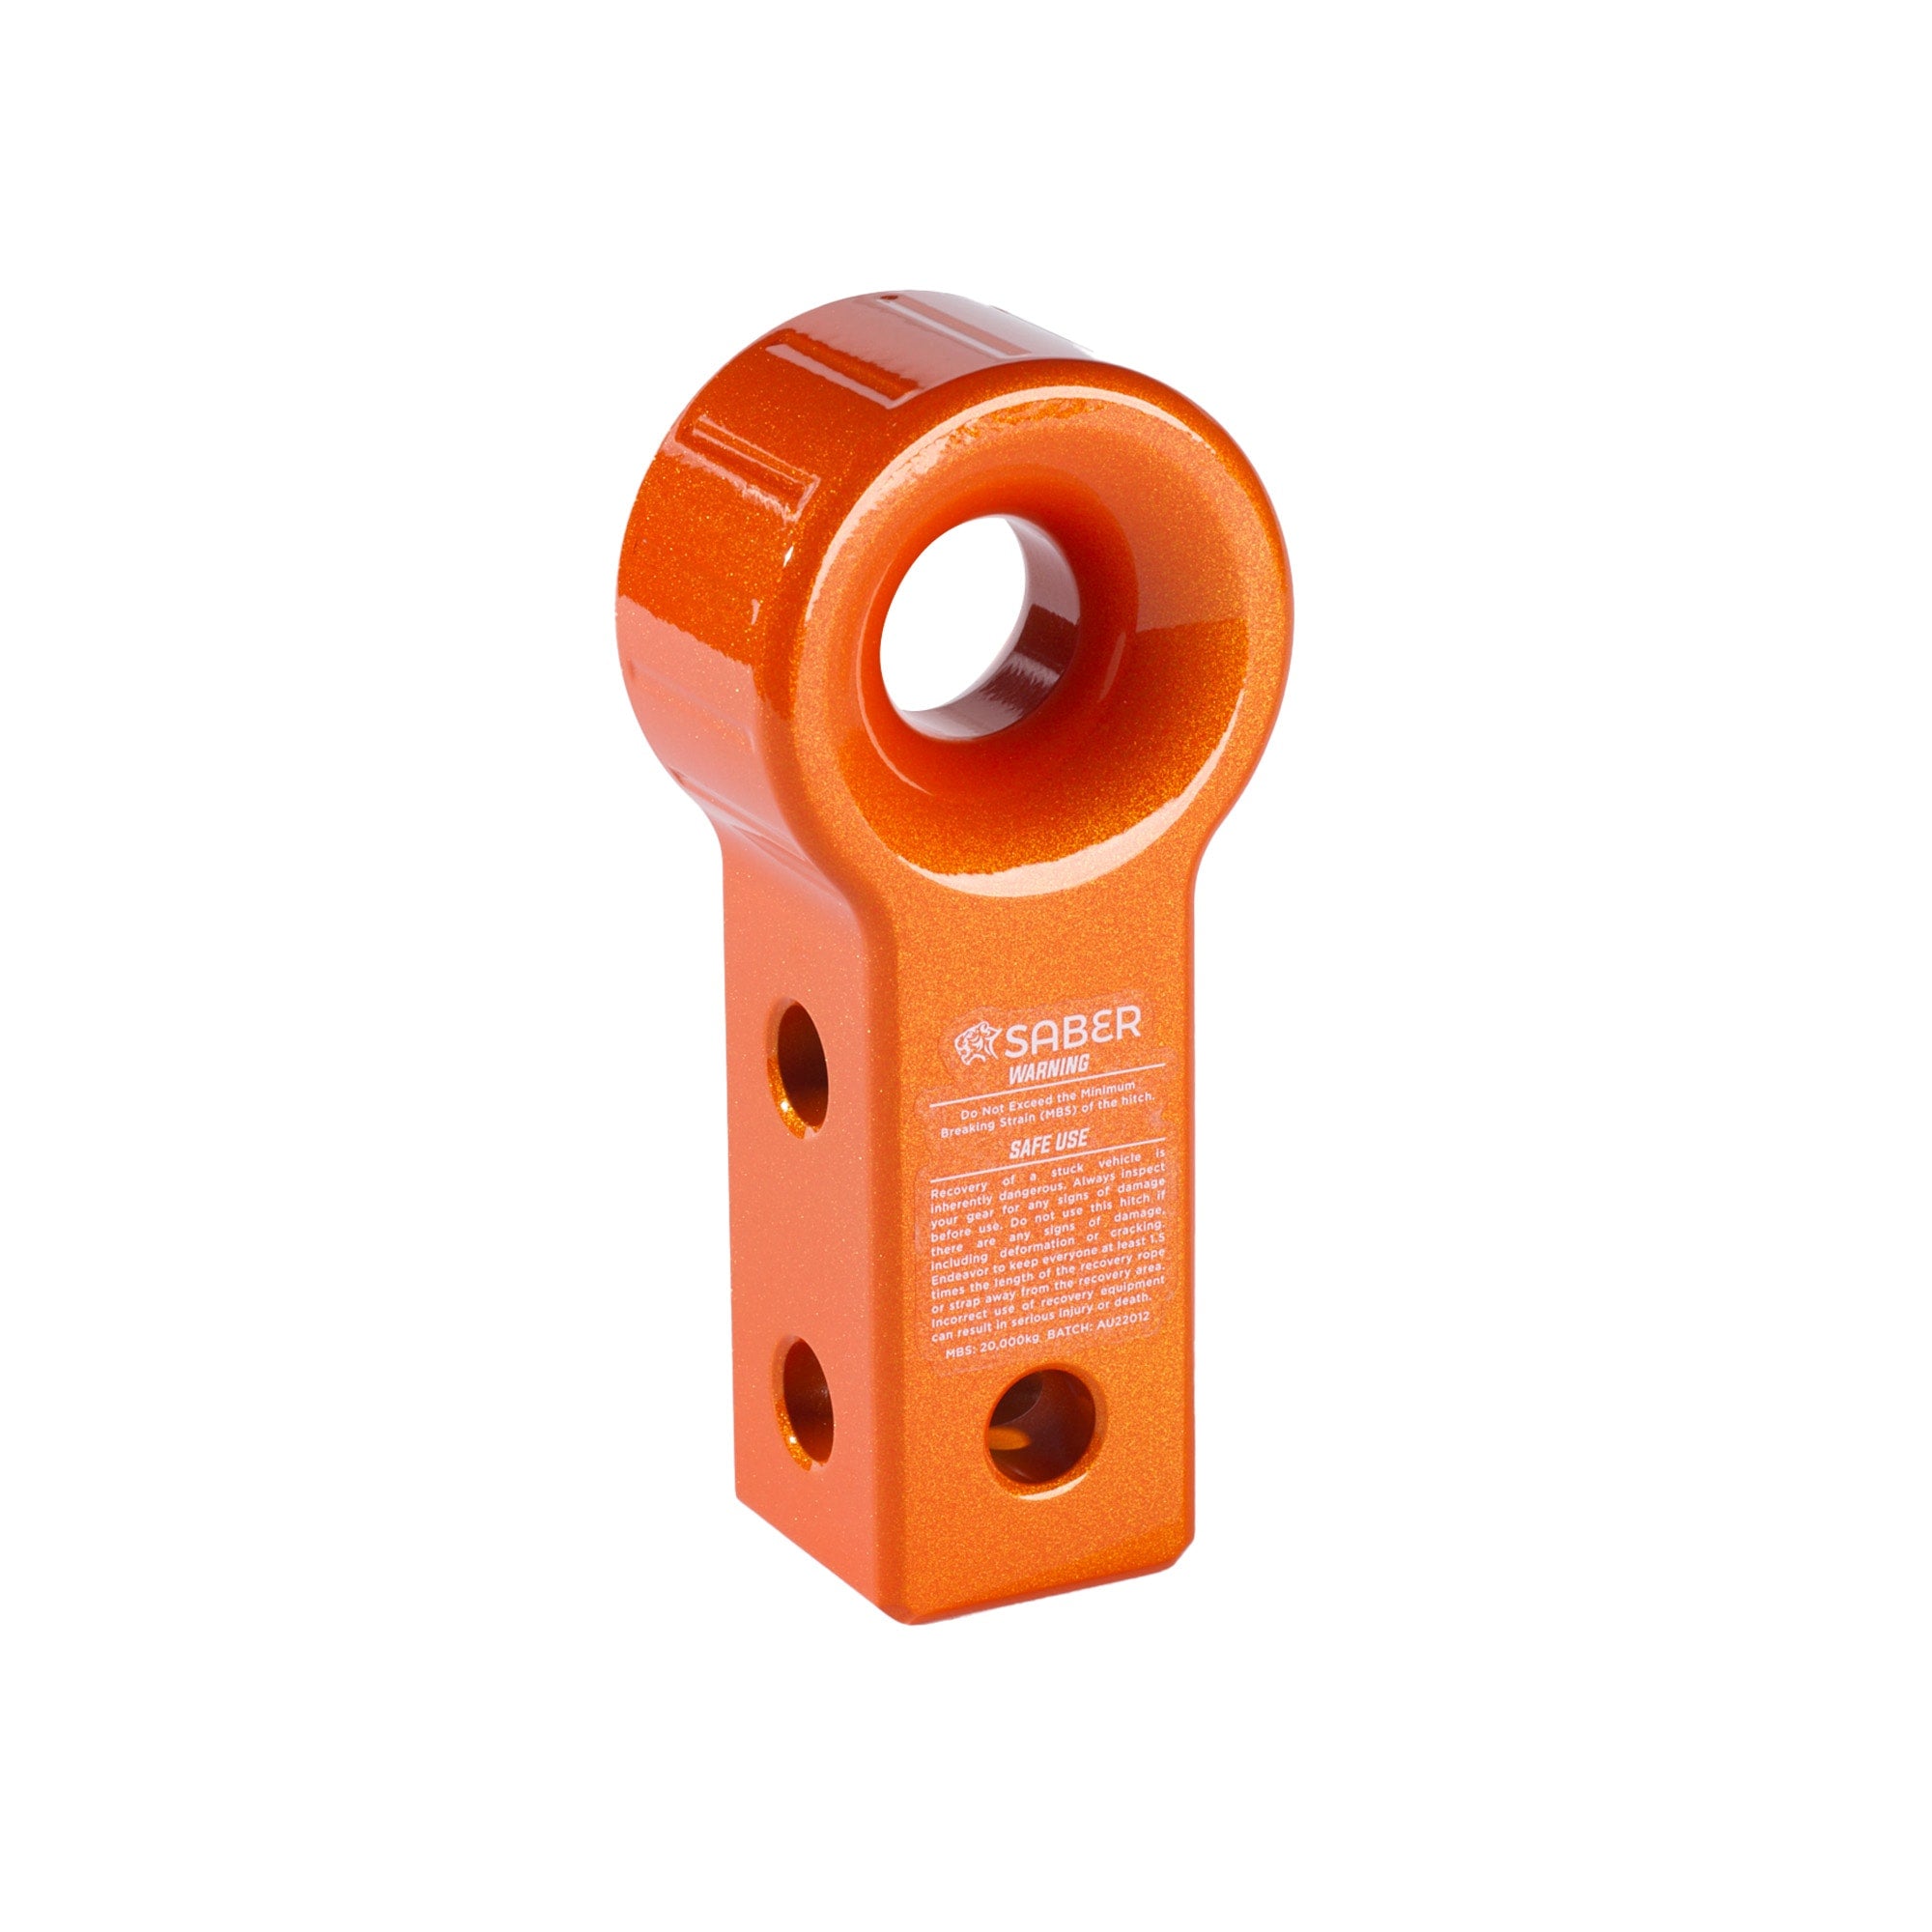 Saber Offroad 7075 Soft Shackle Only Aluminium Recovery Hitch – Prismatic Orange